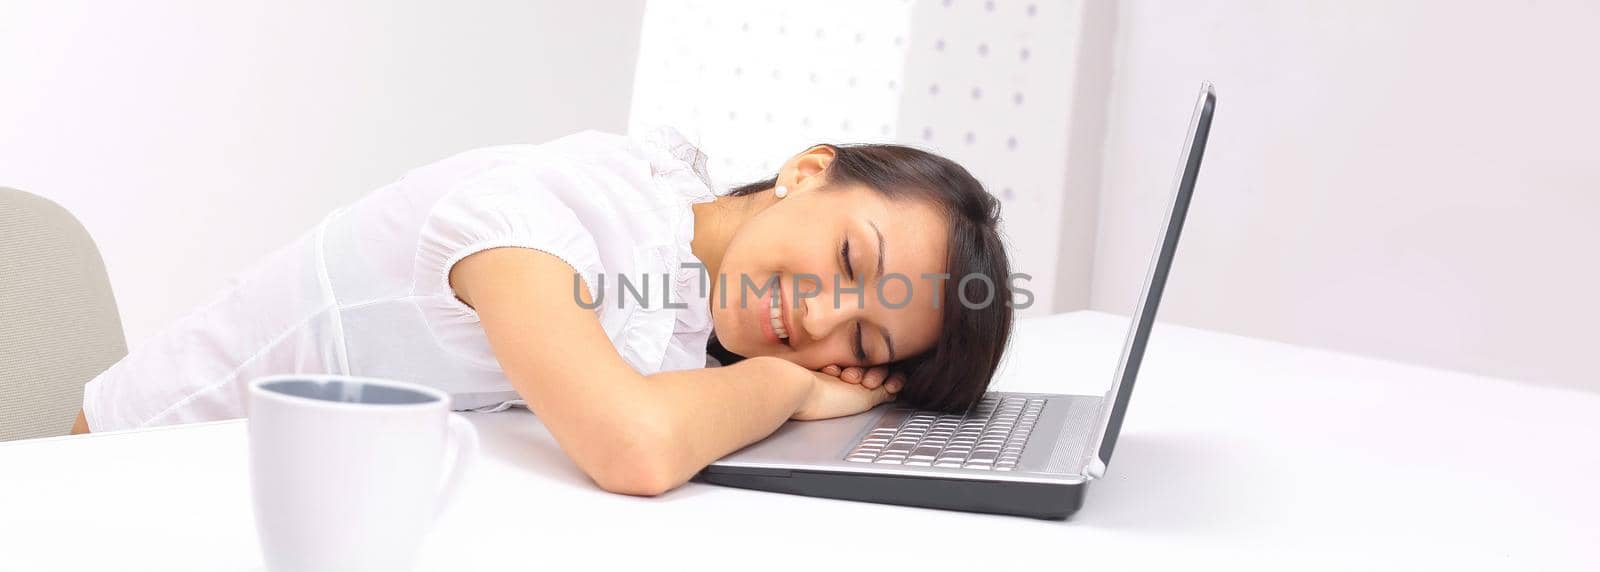 closeup.young business woman sleeping on the laptop keyboard by SmartPhotoLab